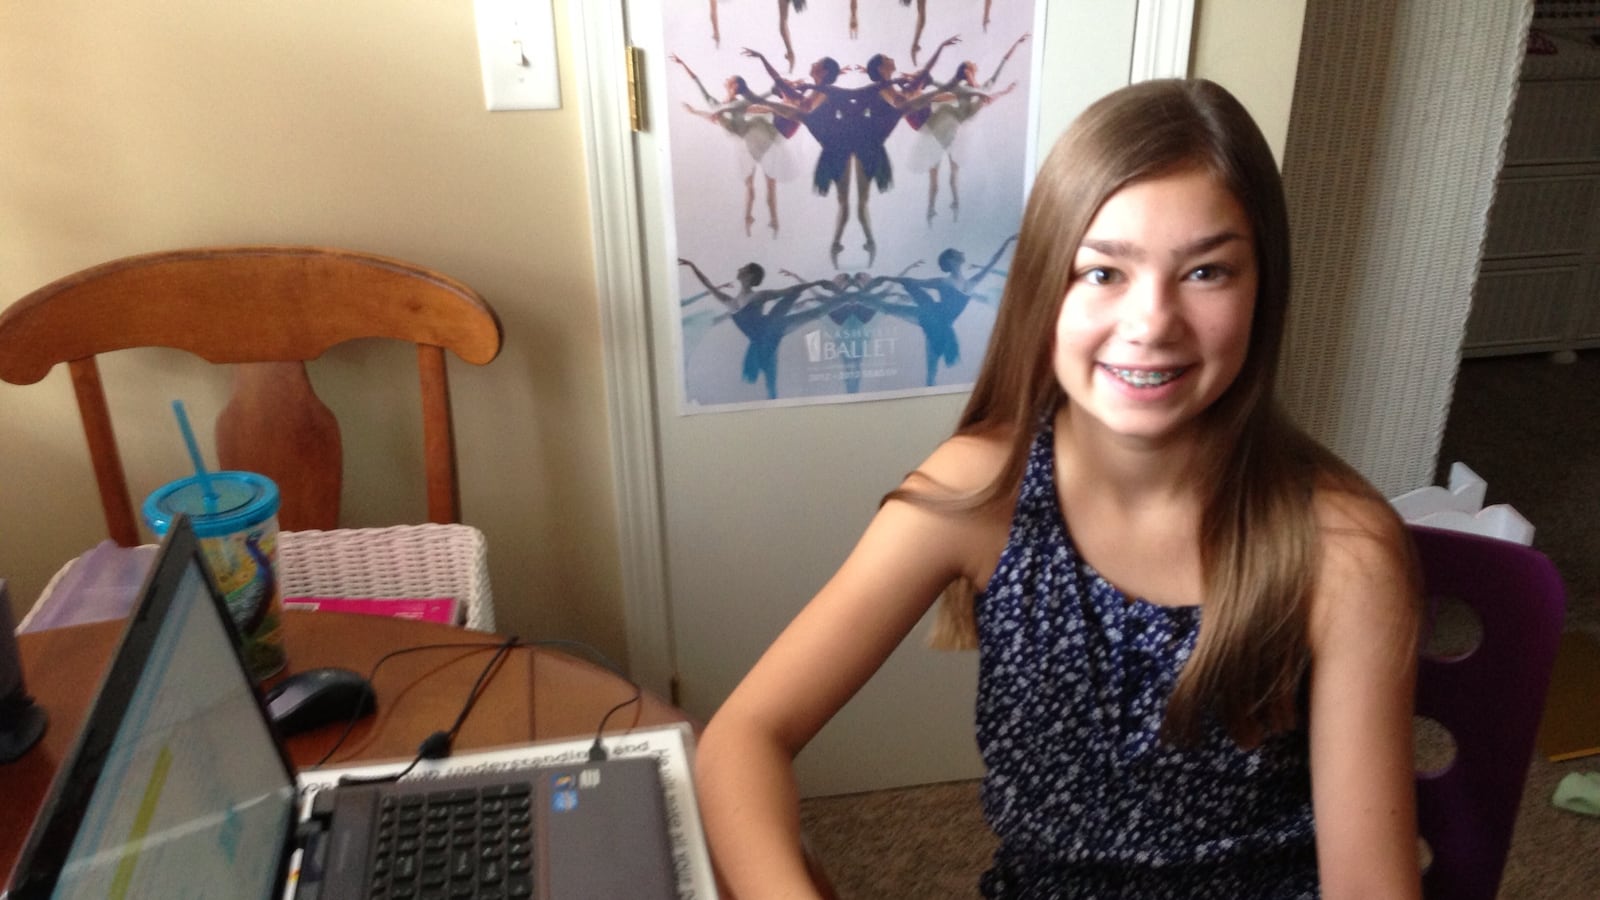 Lilly Painter, a Williamson County seventh-grader, enjoys taking online classes through the Tennessee Virtual Academy, allowing her the flexibility to pursue her passion of dance.